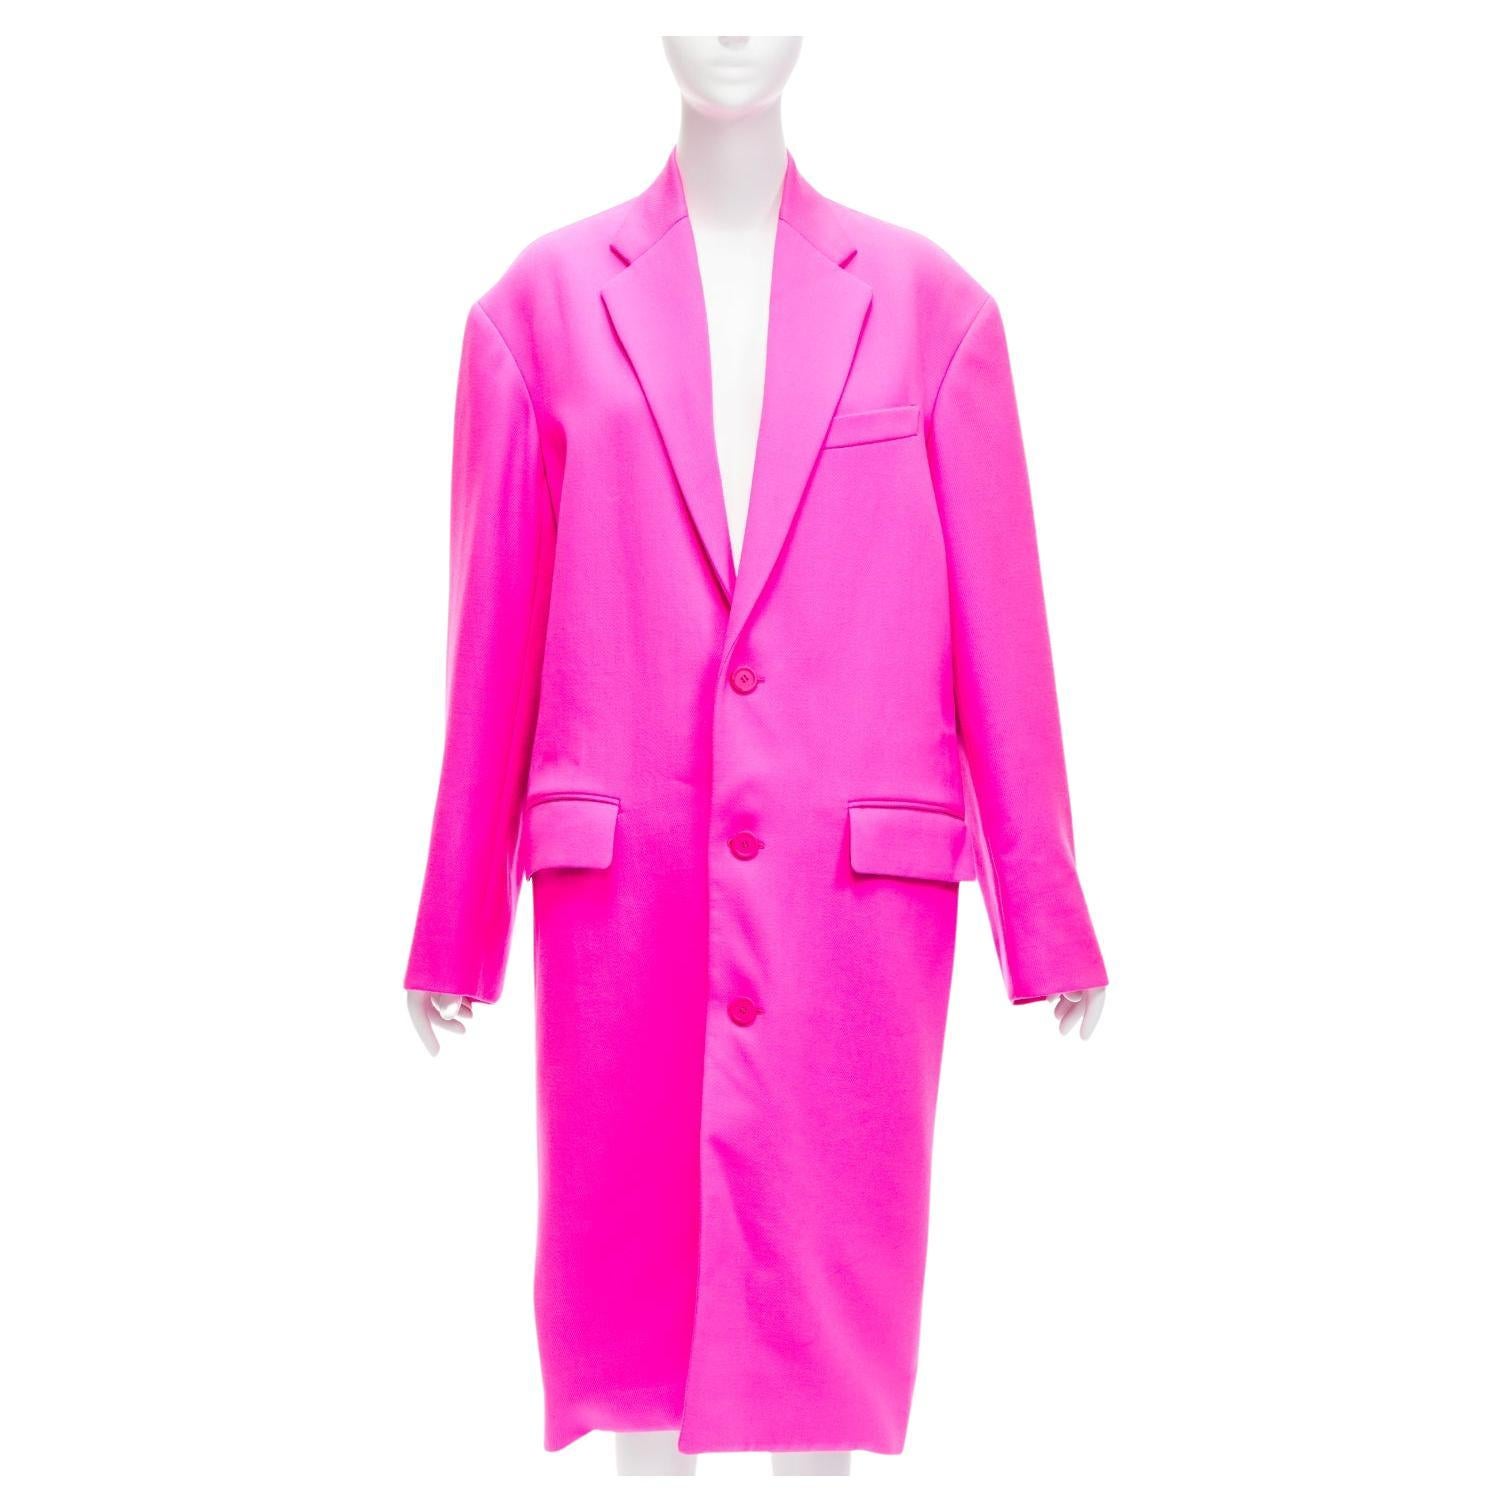 BALENCIAGA hot pink cavalry wool oversized long coat FR34 XS Hailey Beiber For Sale